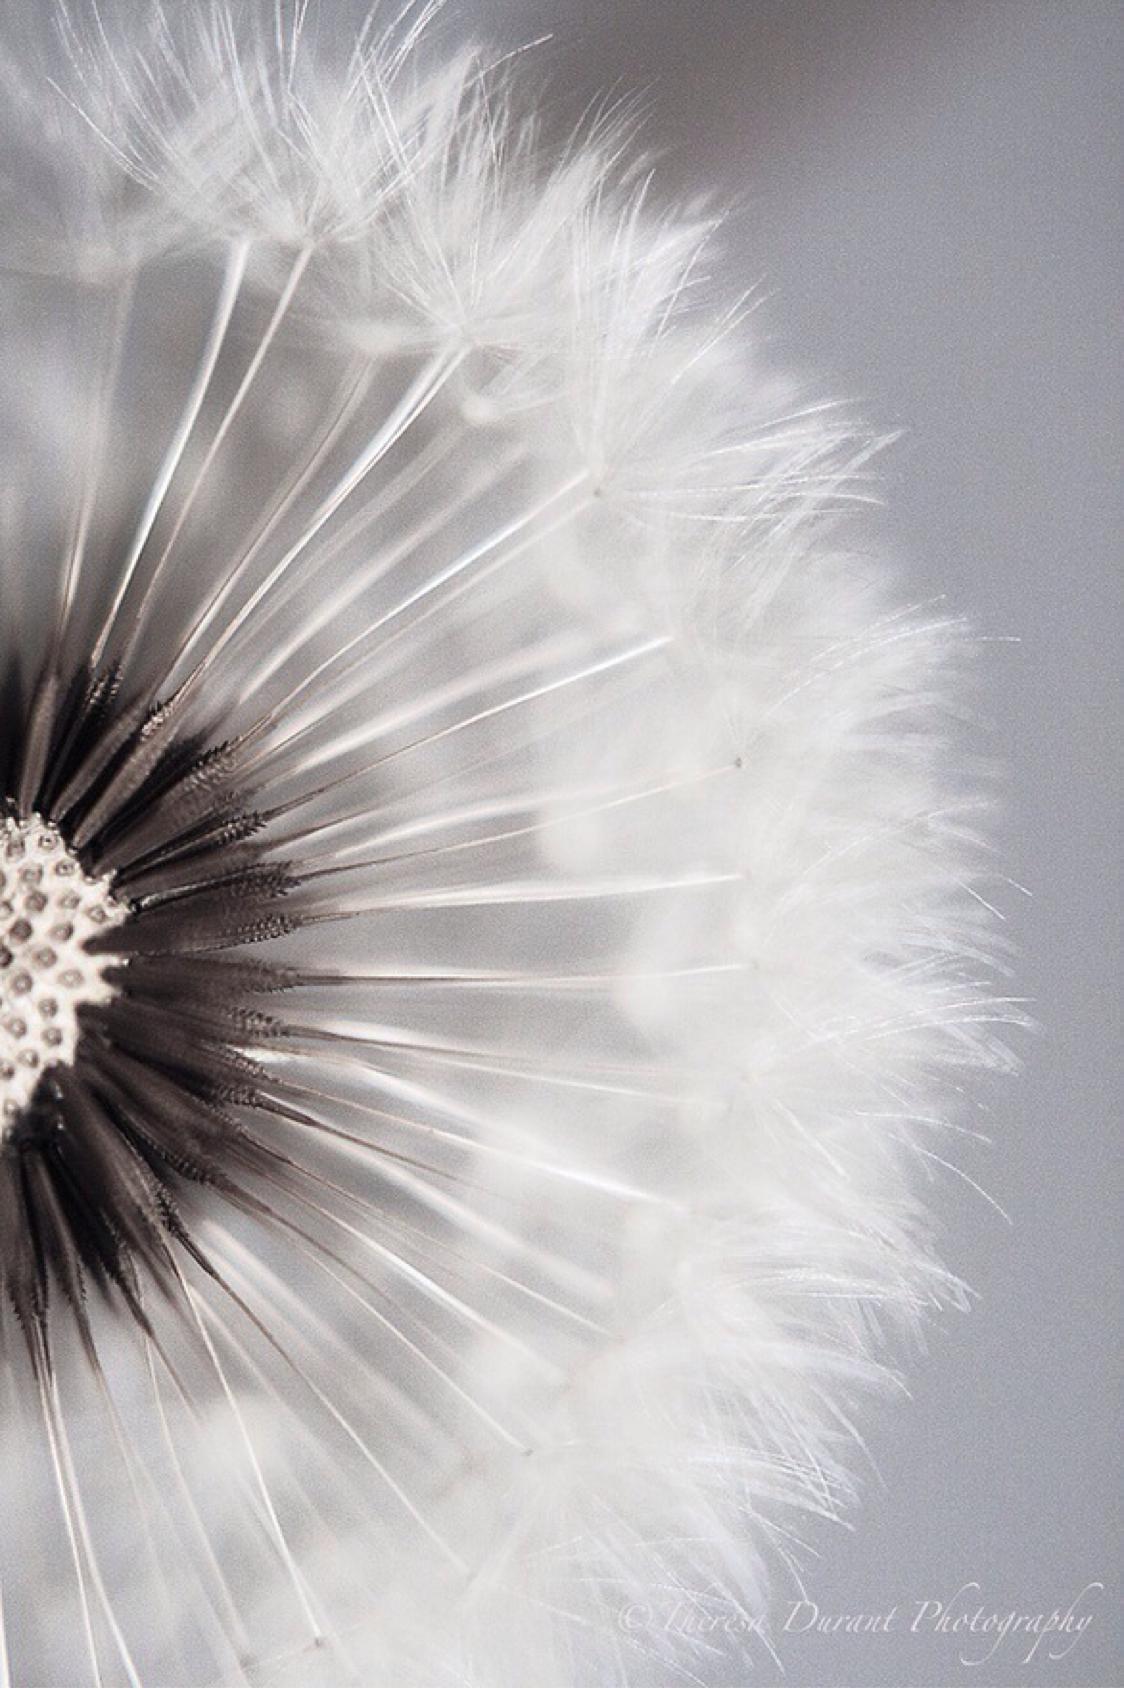 dandelion downy nature delicate wind bright summer flower seed abstract softness